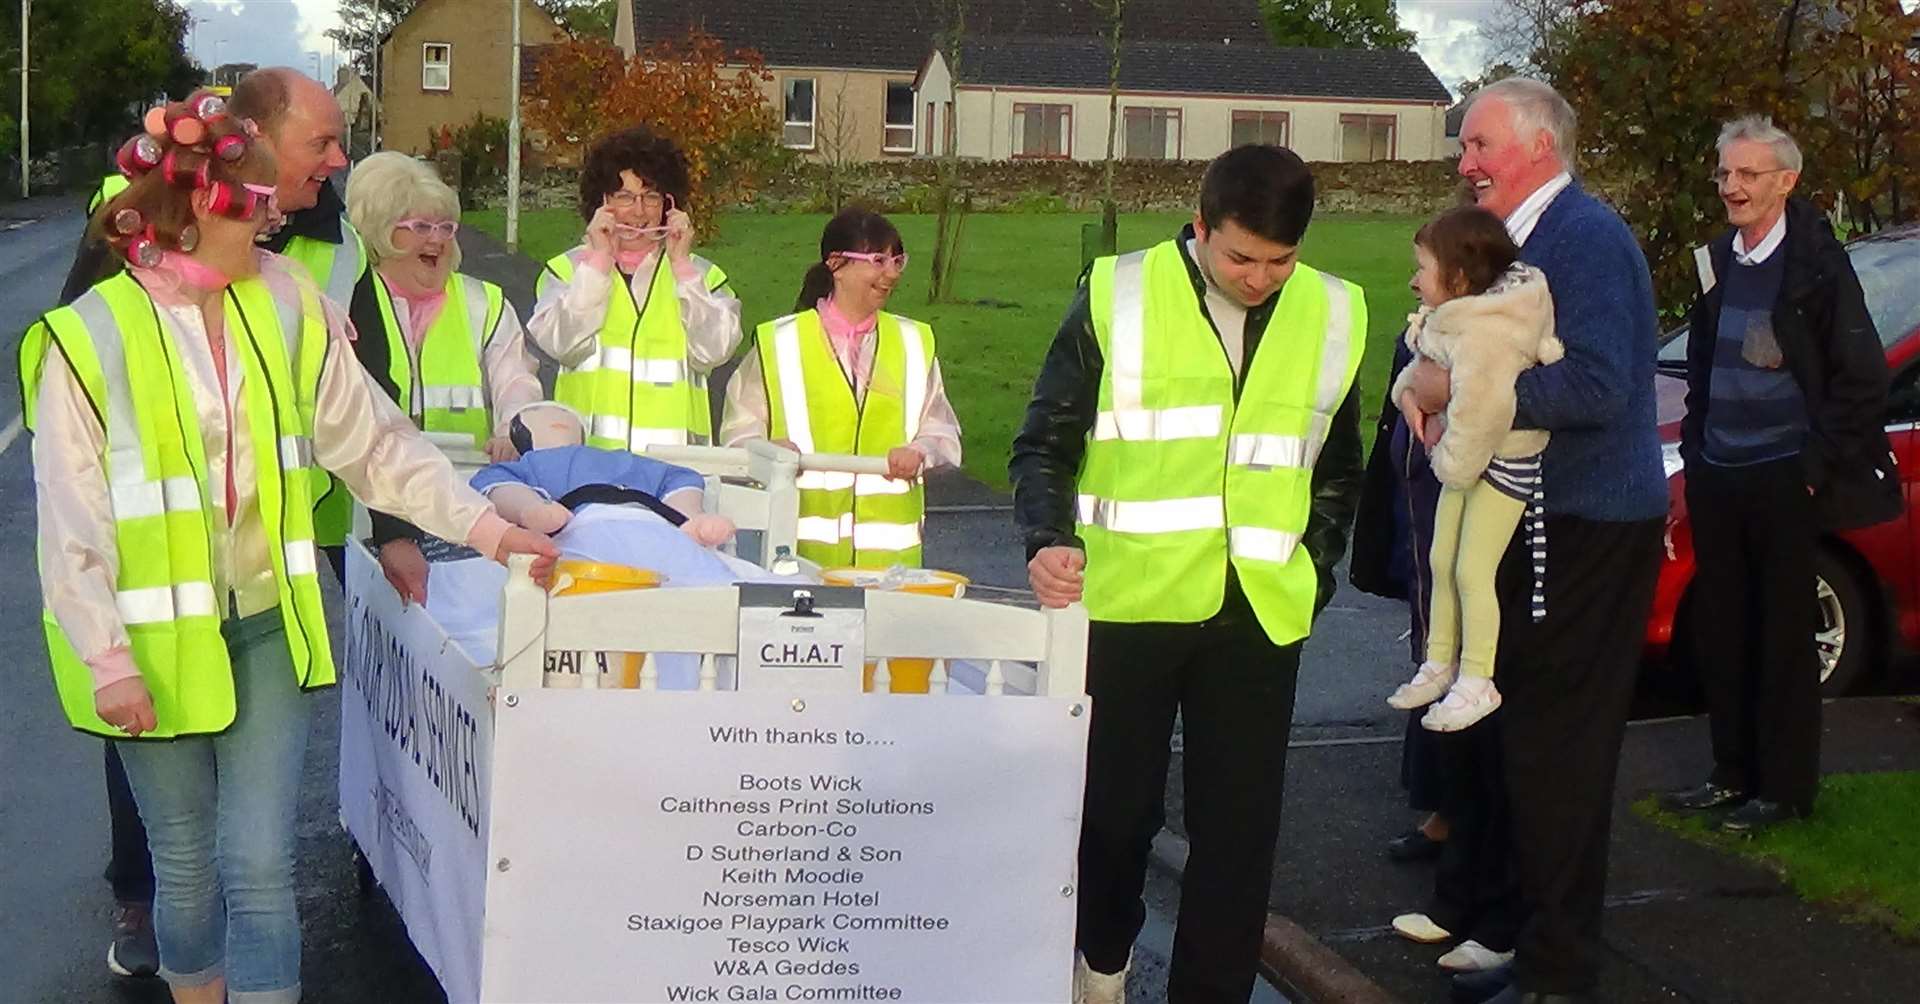 Andrew Mackay (left) with members of the Castletown Hotel team taking part in the bedpush relay in Castletown. Photo: Will Clark